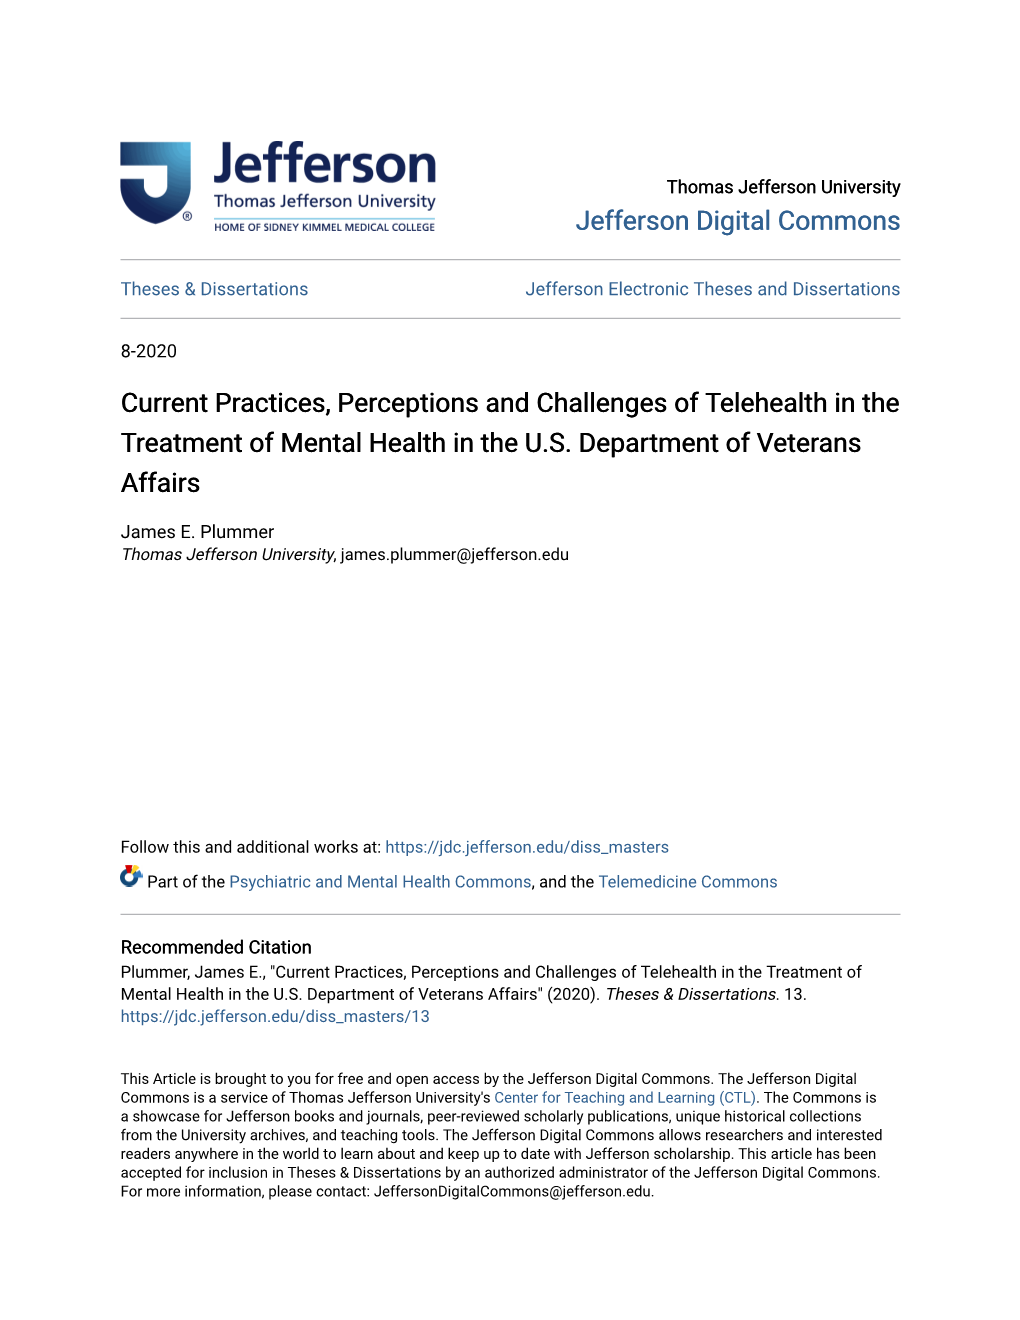 Current Practices, Perceptions and Challenges of Telehealth in the Treatment of Mental Health in the U.S